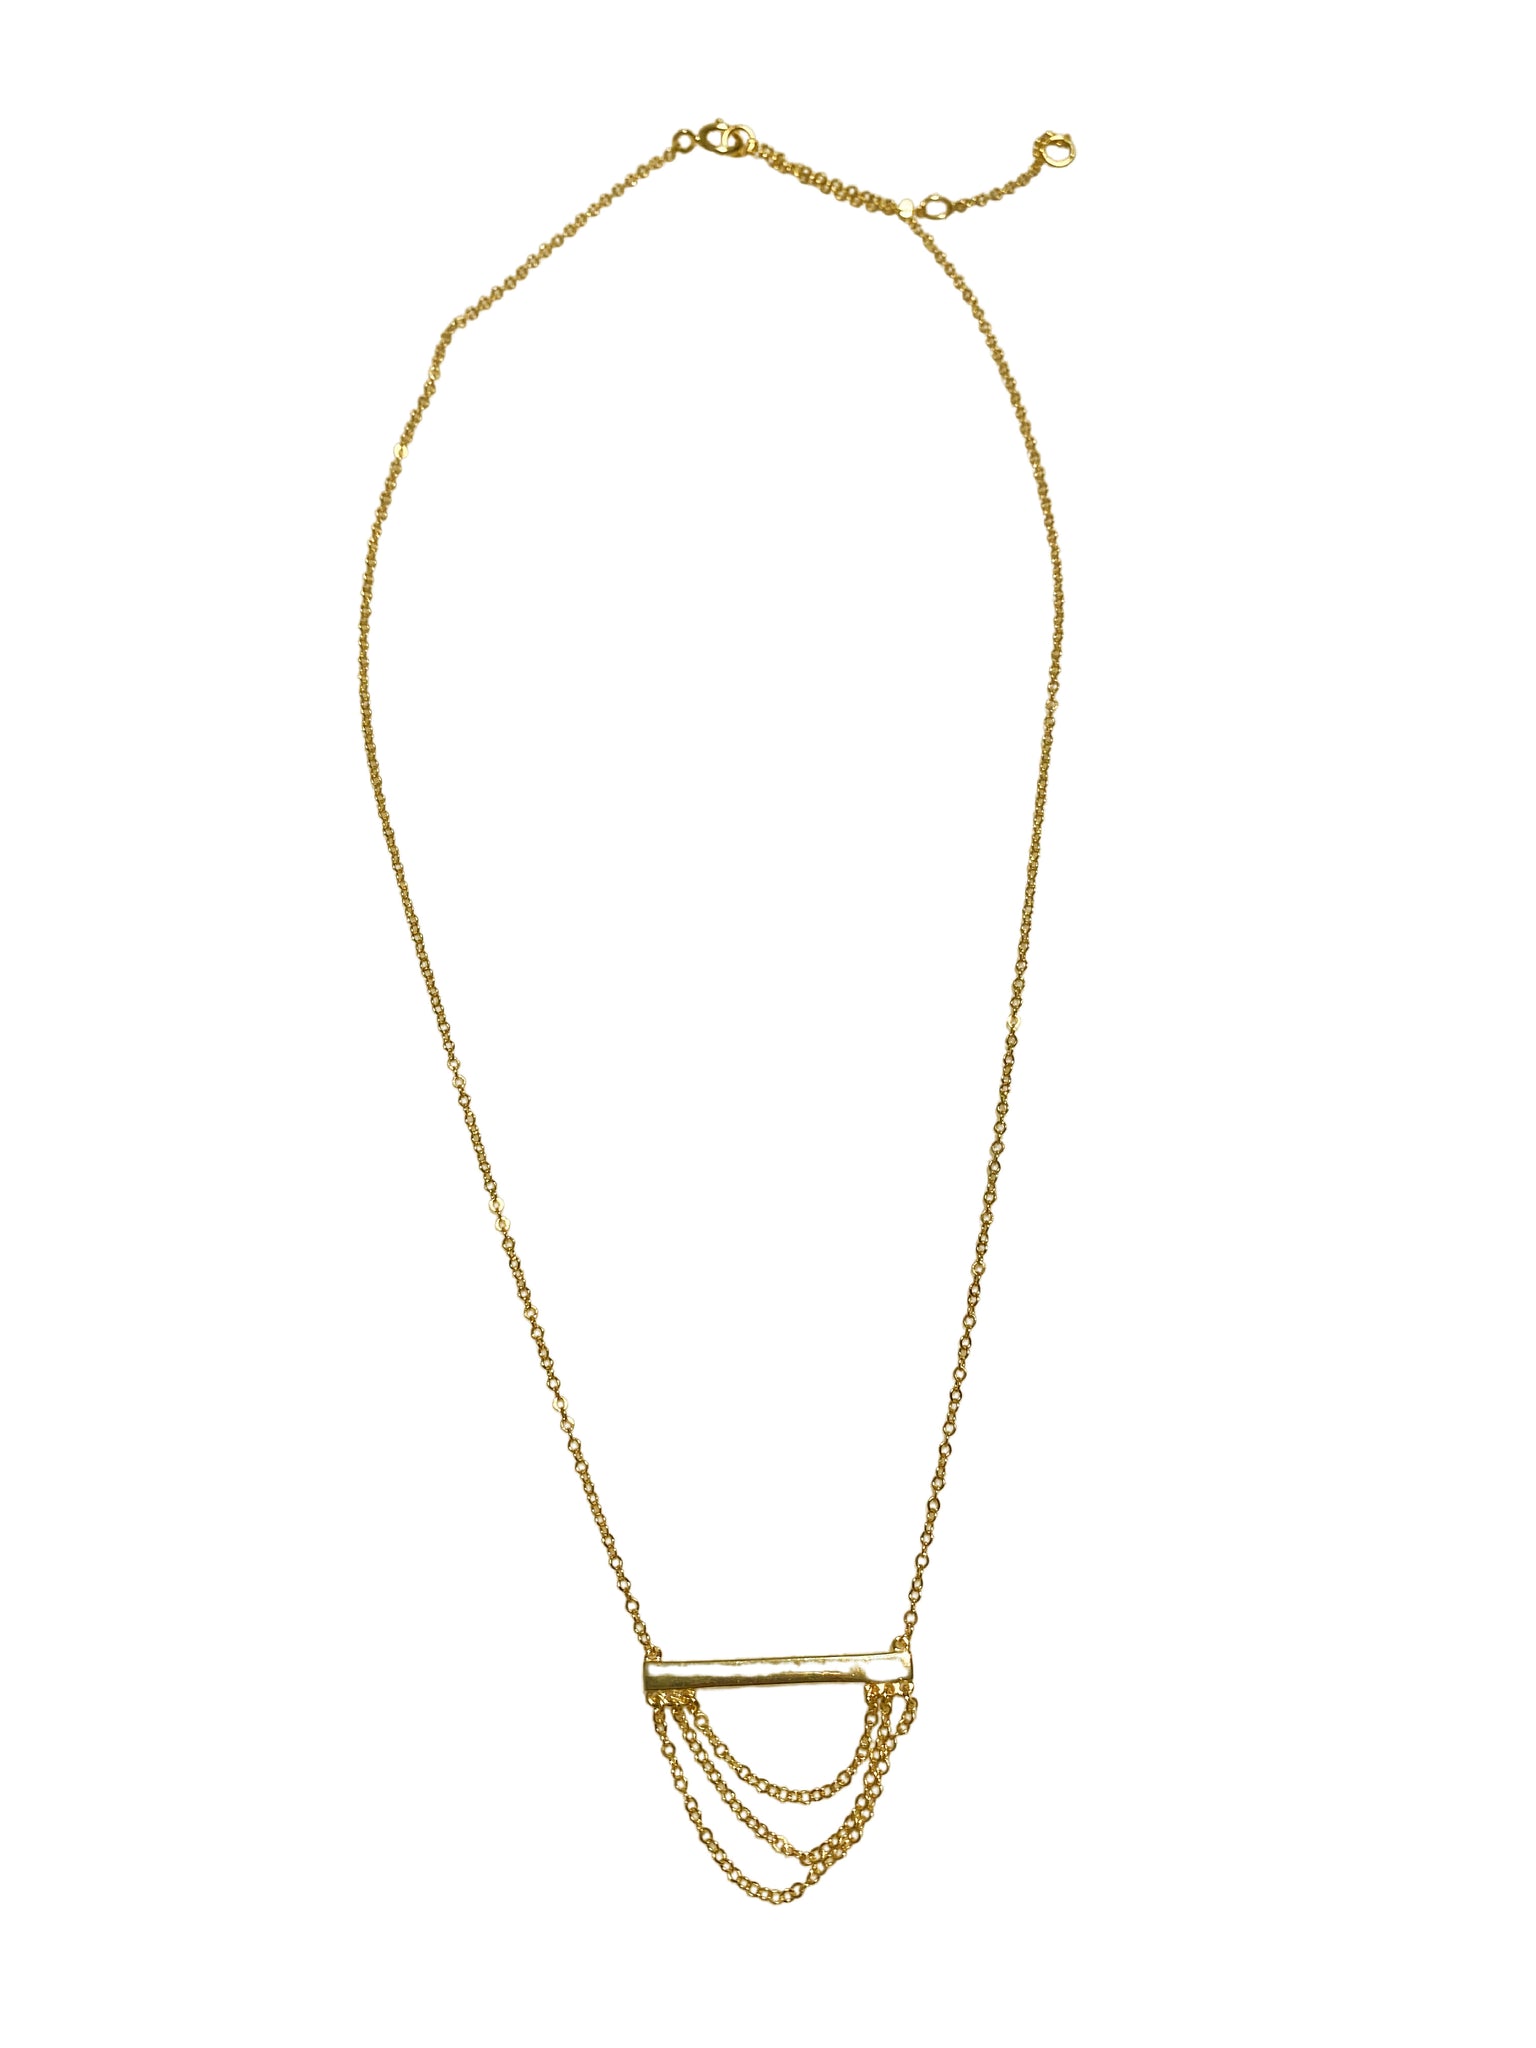 SS-Gold Thin Bar w/Hanging Chains